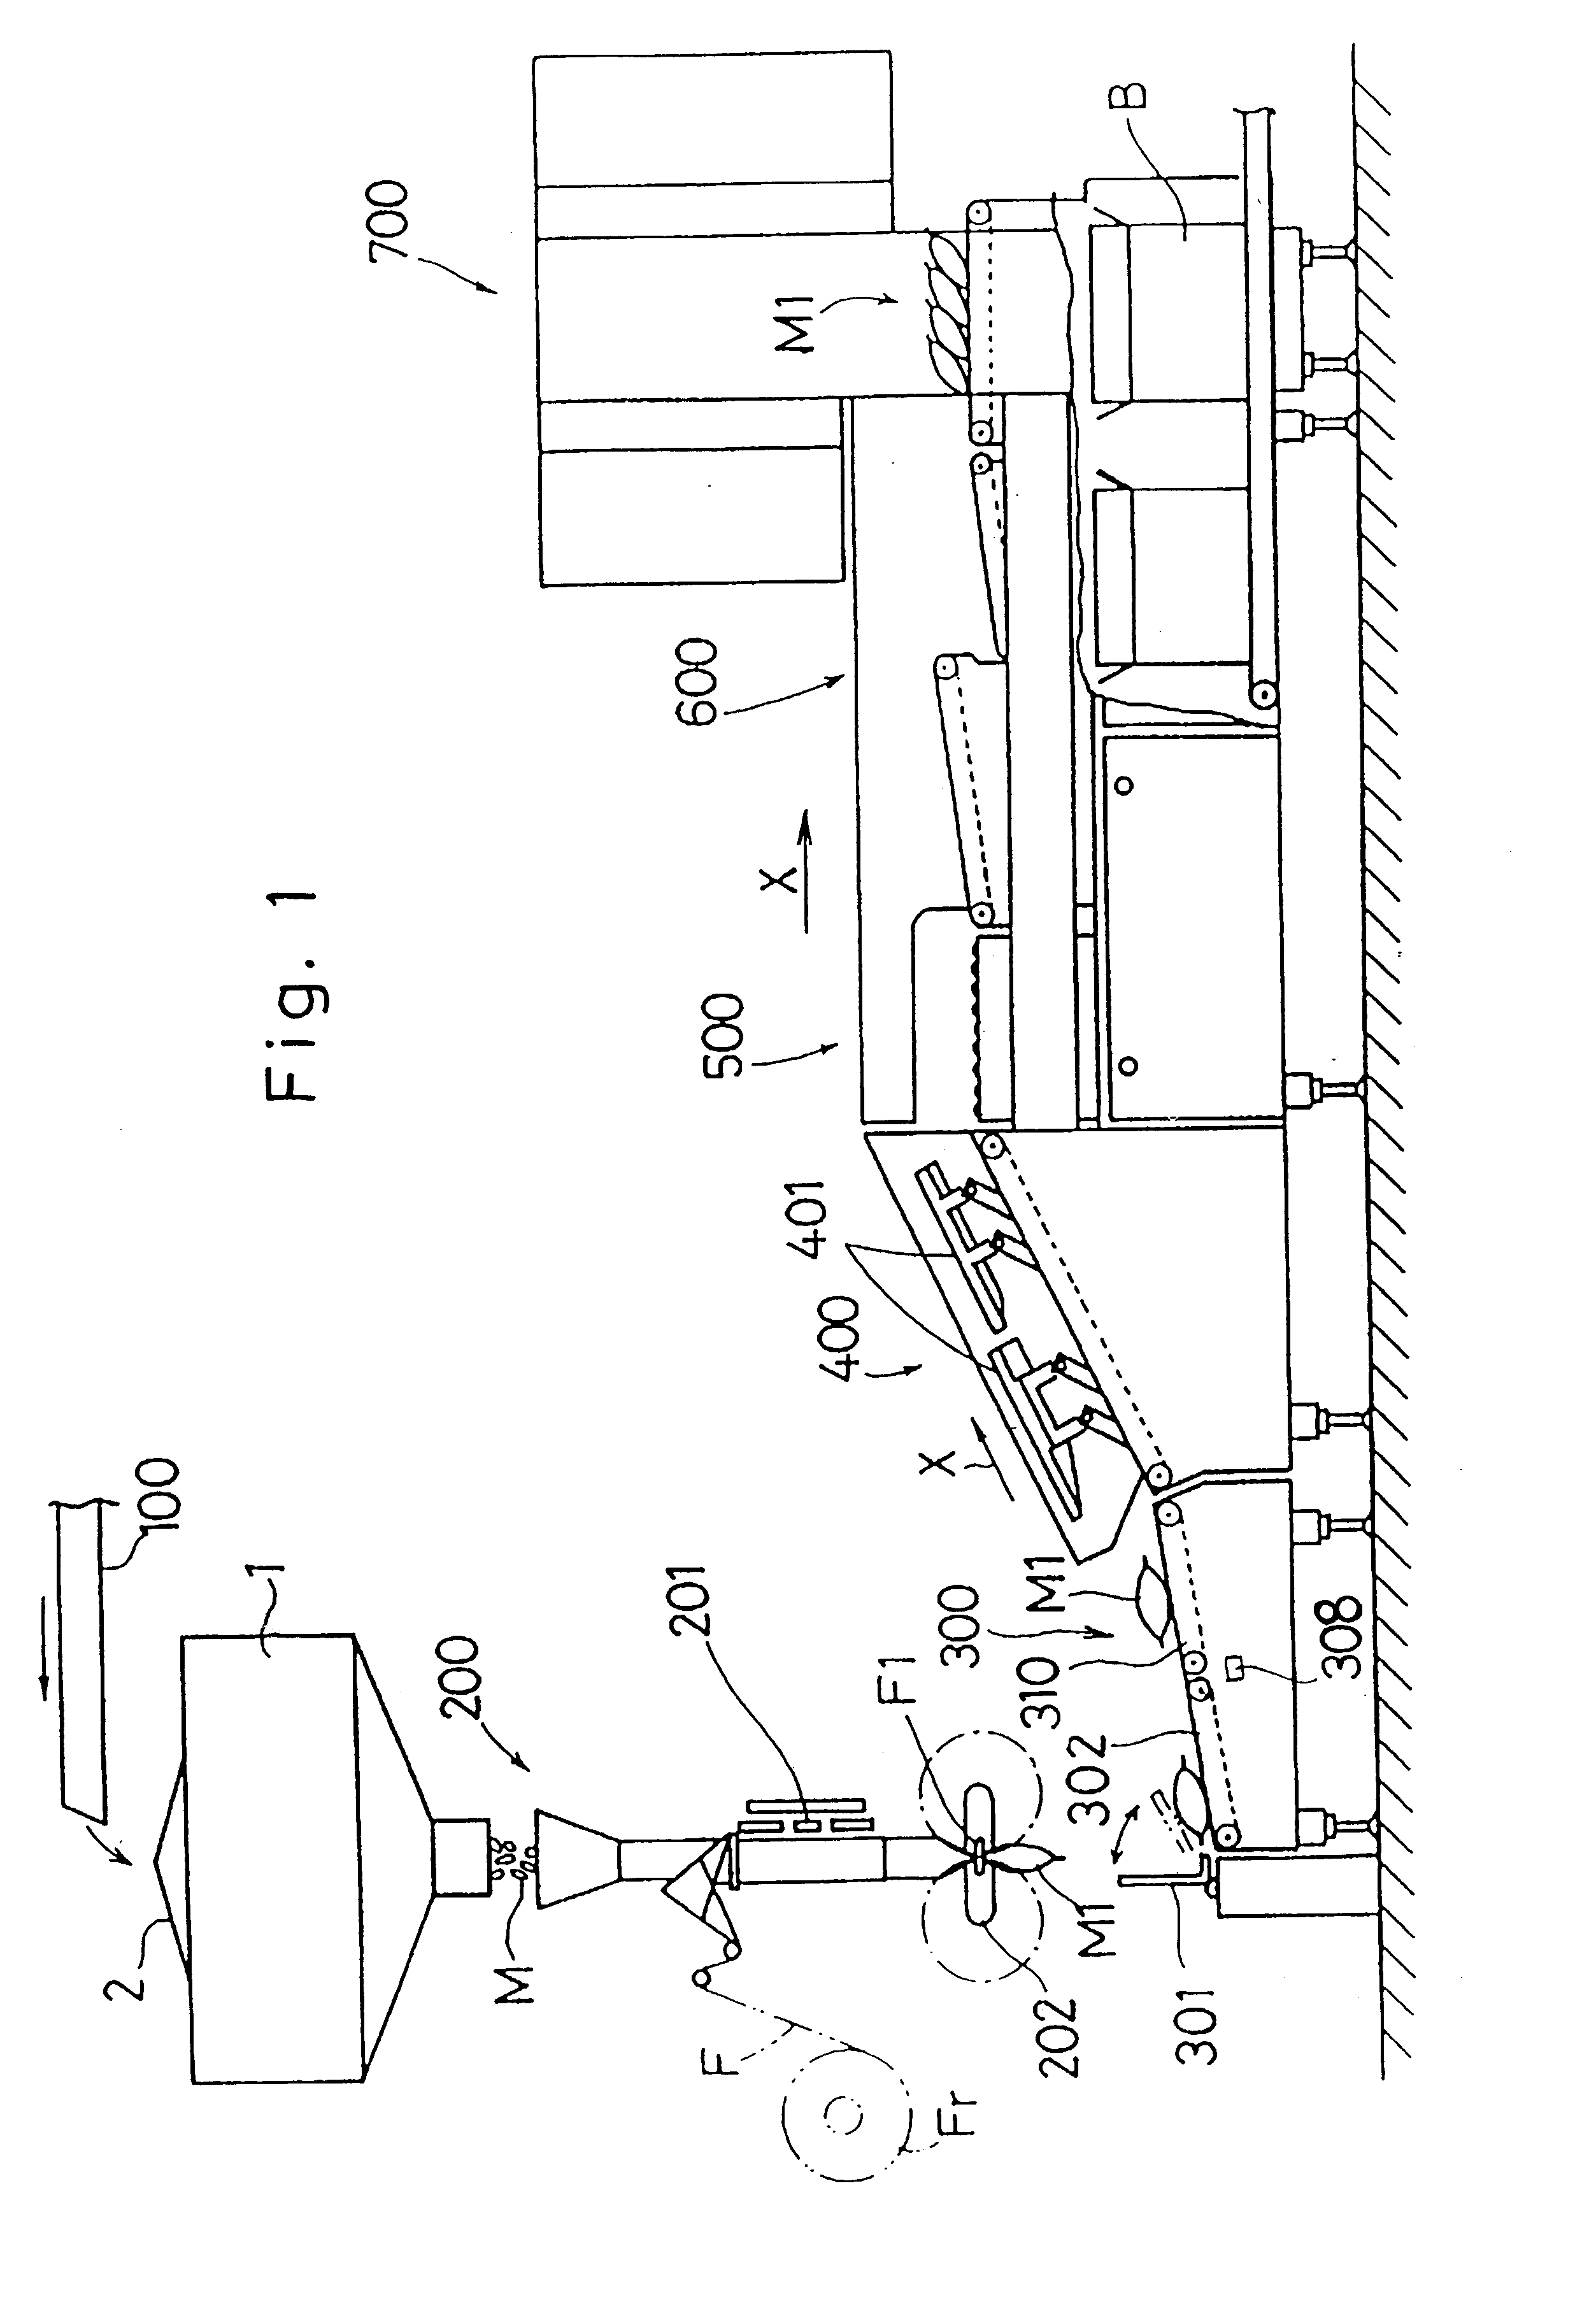 Weighing, packaging and inspecting system